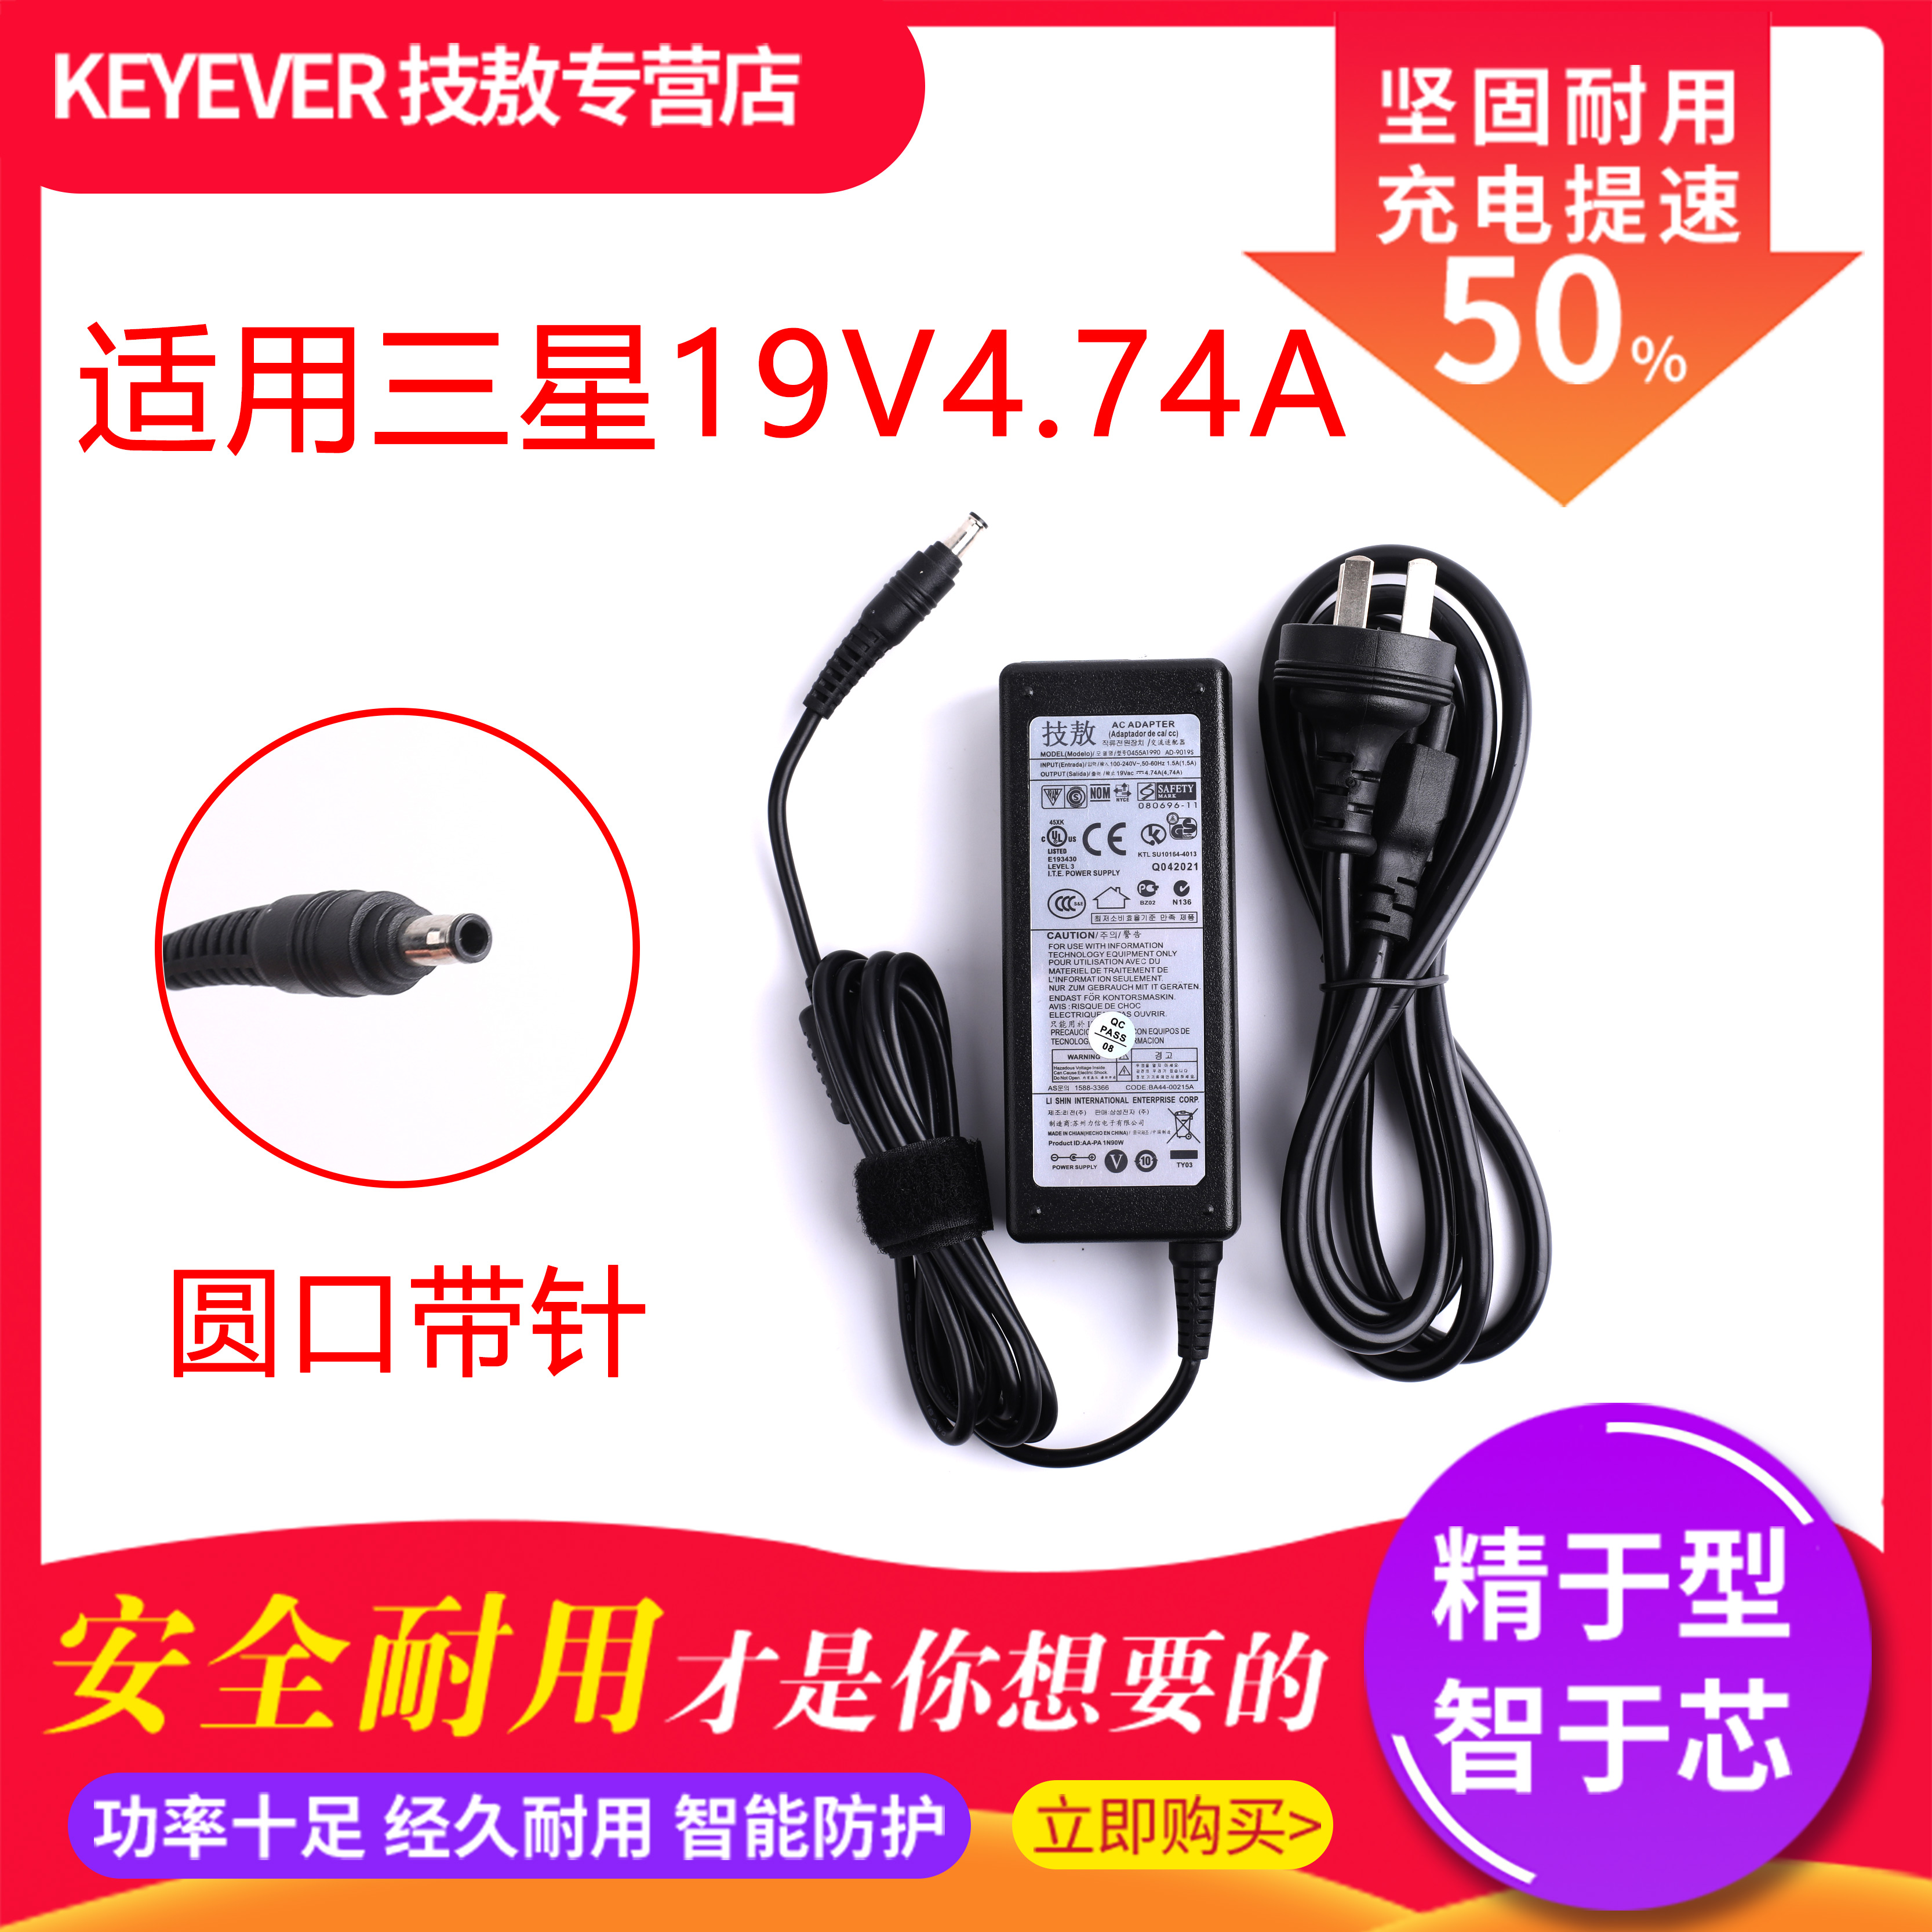 Samsung Power Adapter 19V 4.74A Charger R25 R18 R15 Q45 X11P30 / 40